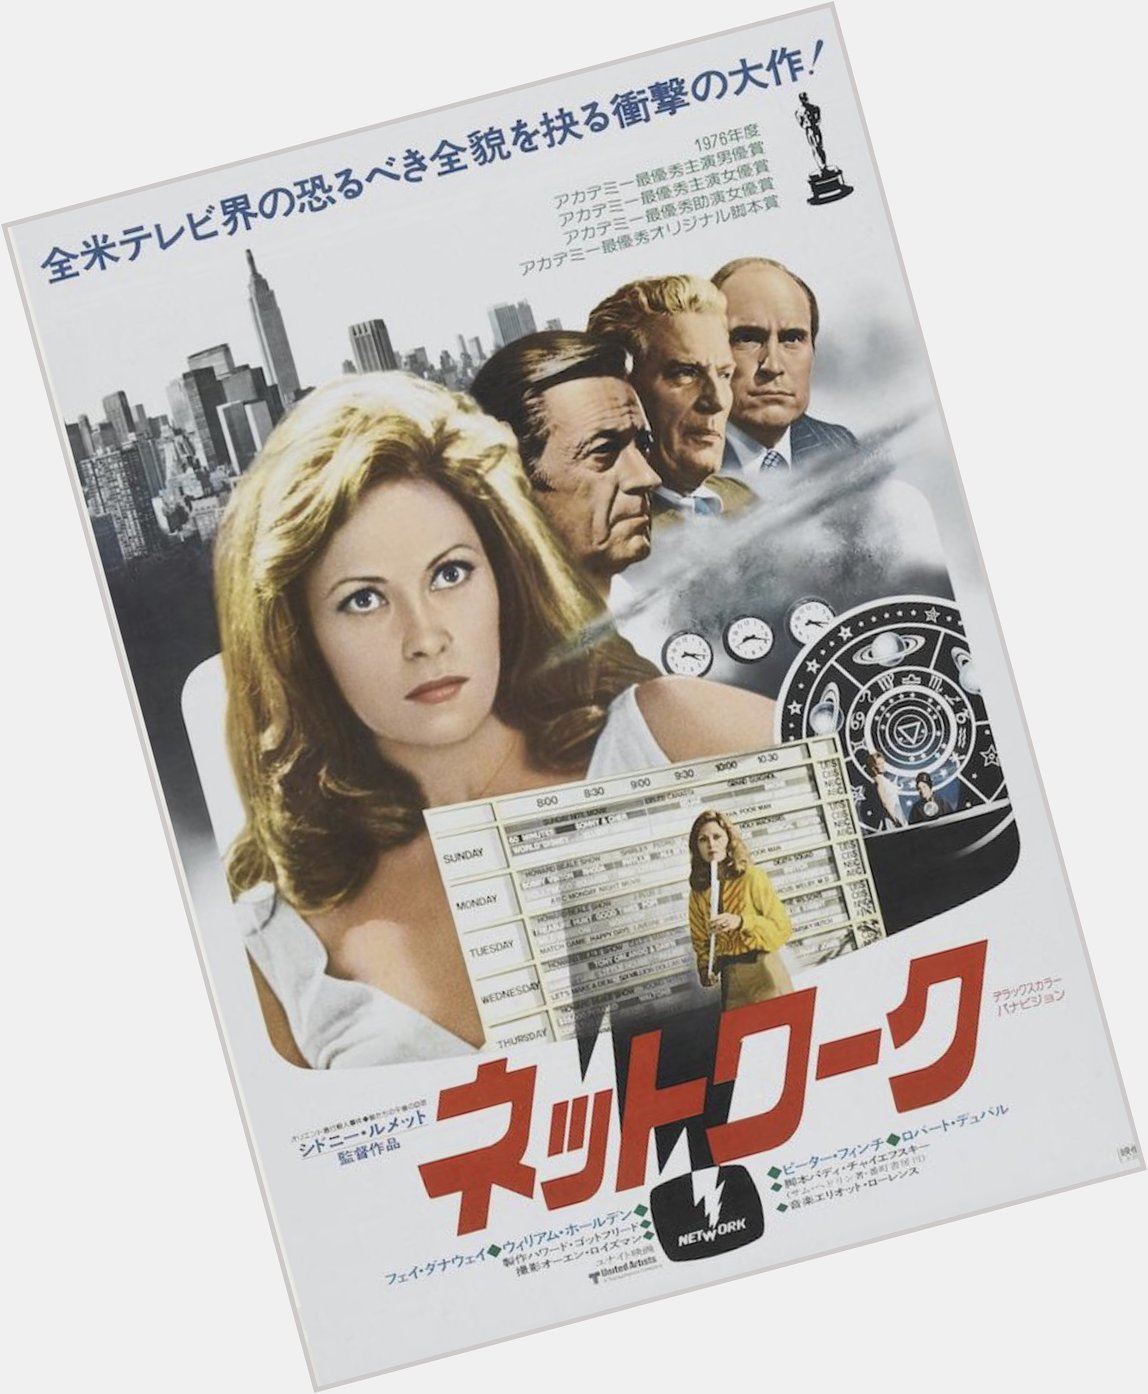 Happy birthday to Faye Dunaway - NETWORK - 1976 - Japanese release poster 